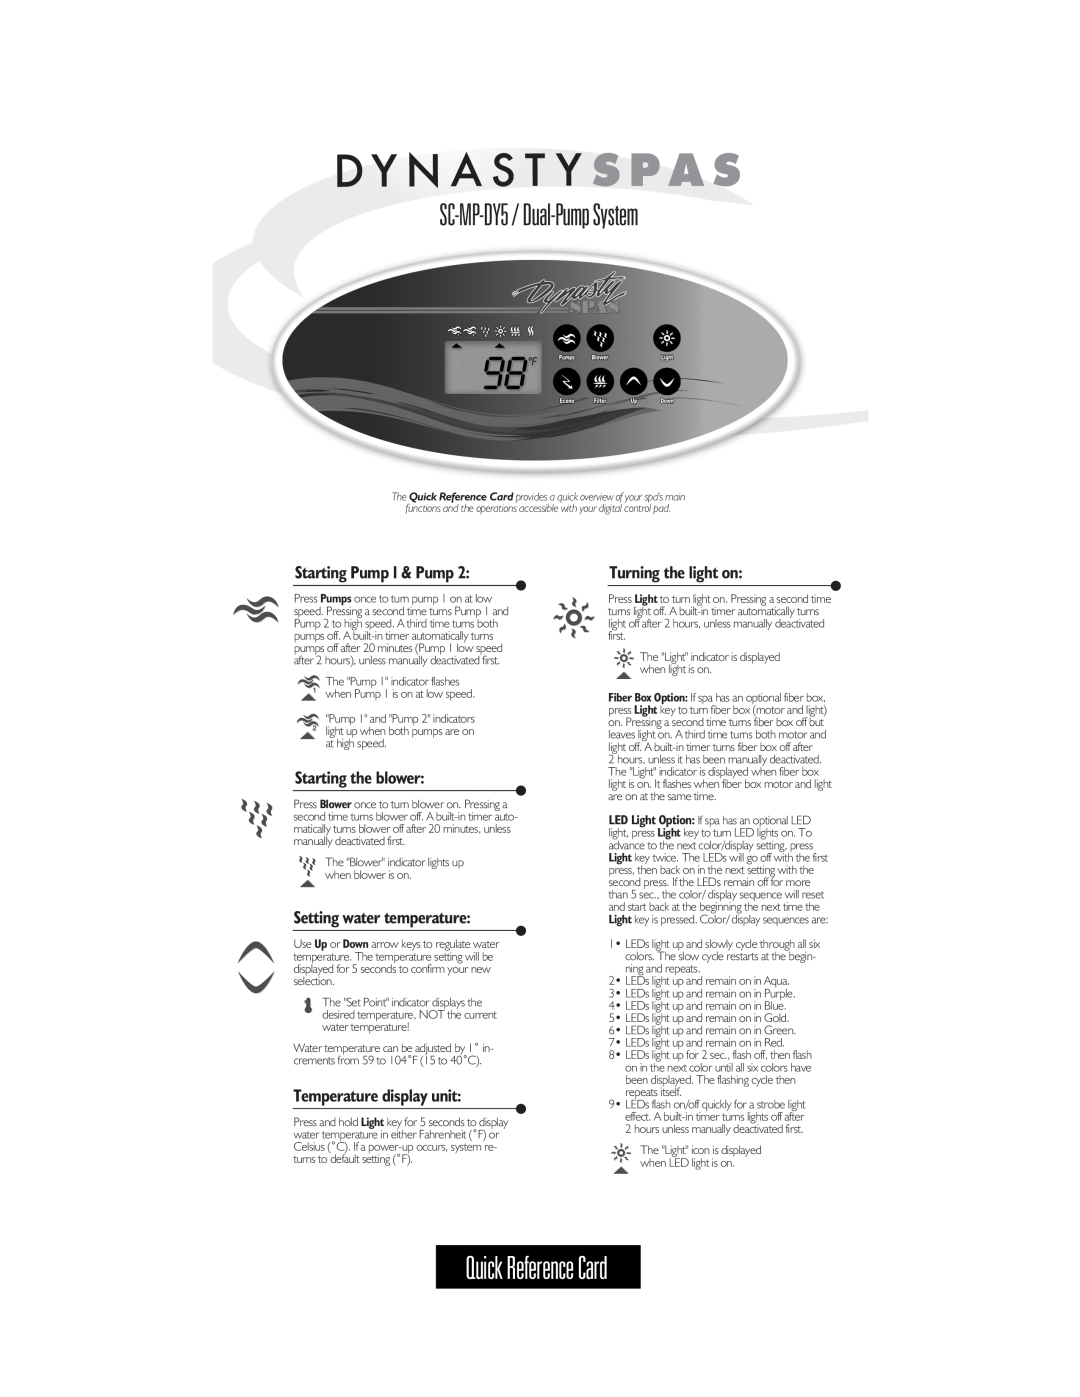 Dynasty Spas SC-MP-DY5 manual The Quick Reference Card provides a quick overview of your spas main, Starting Pump 1 & Pump 